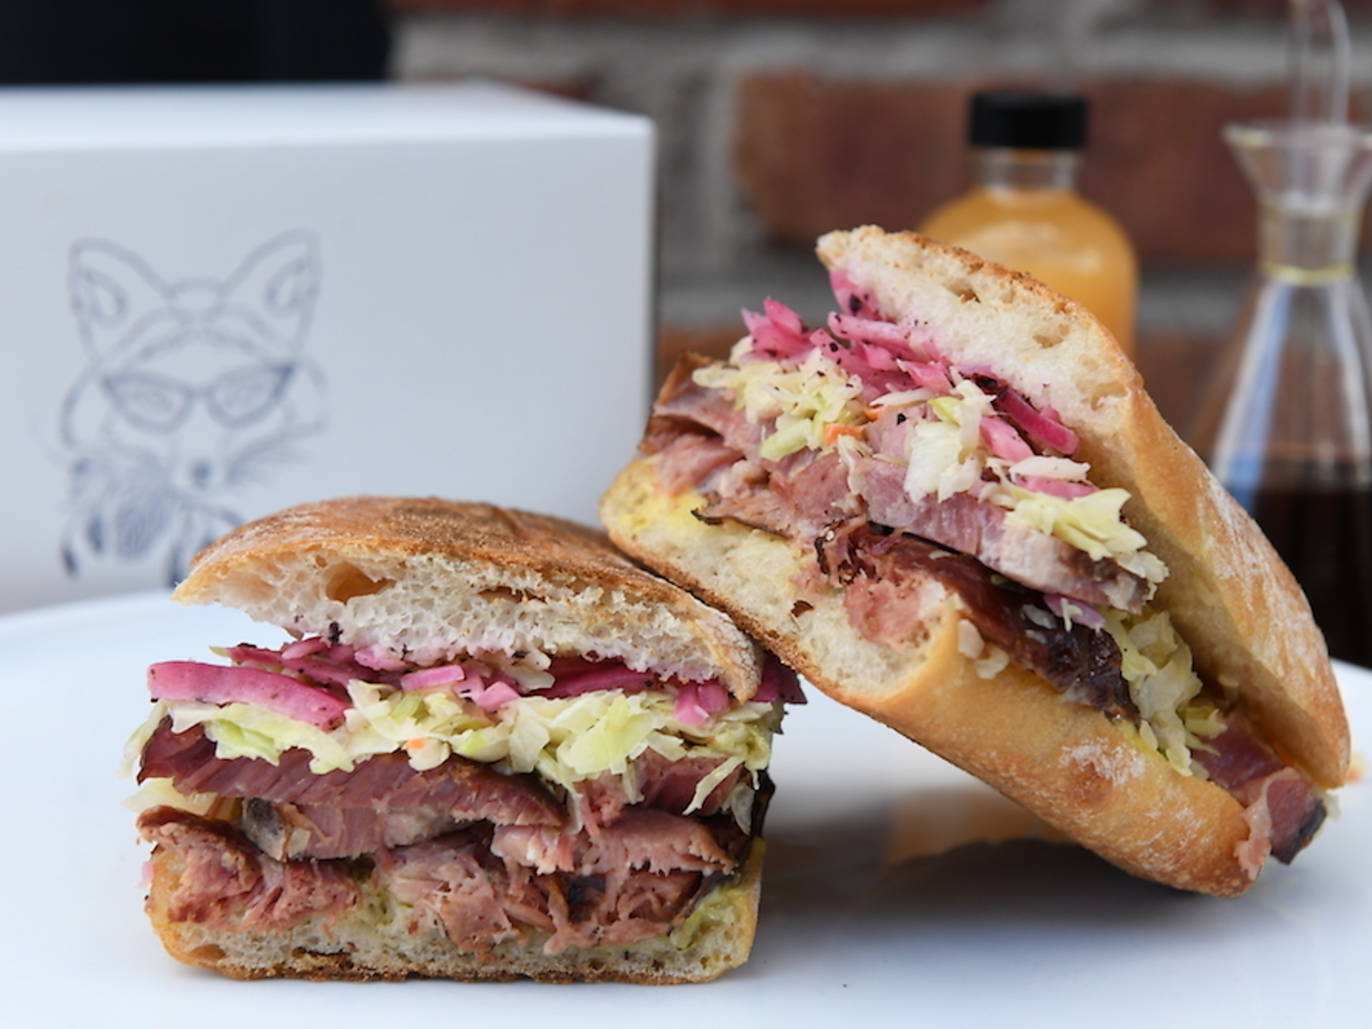 The best sandwiches in NYC 10 great sandwiches to try in the city